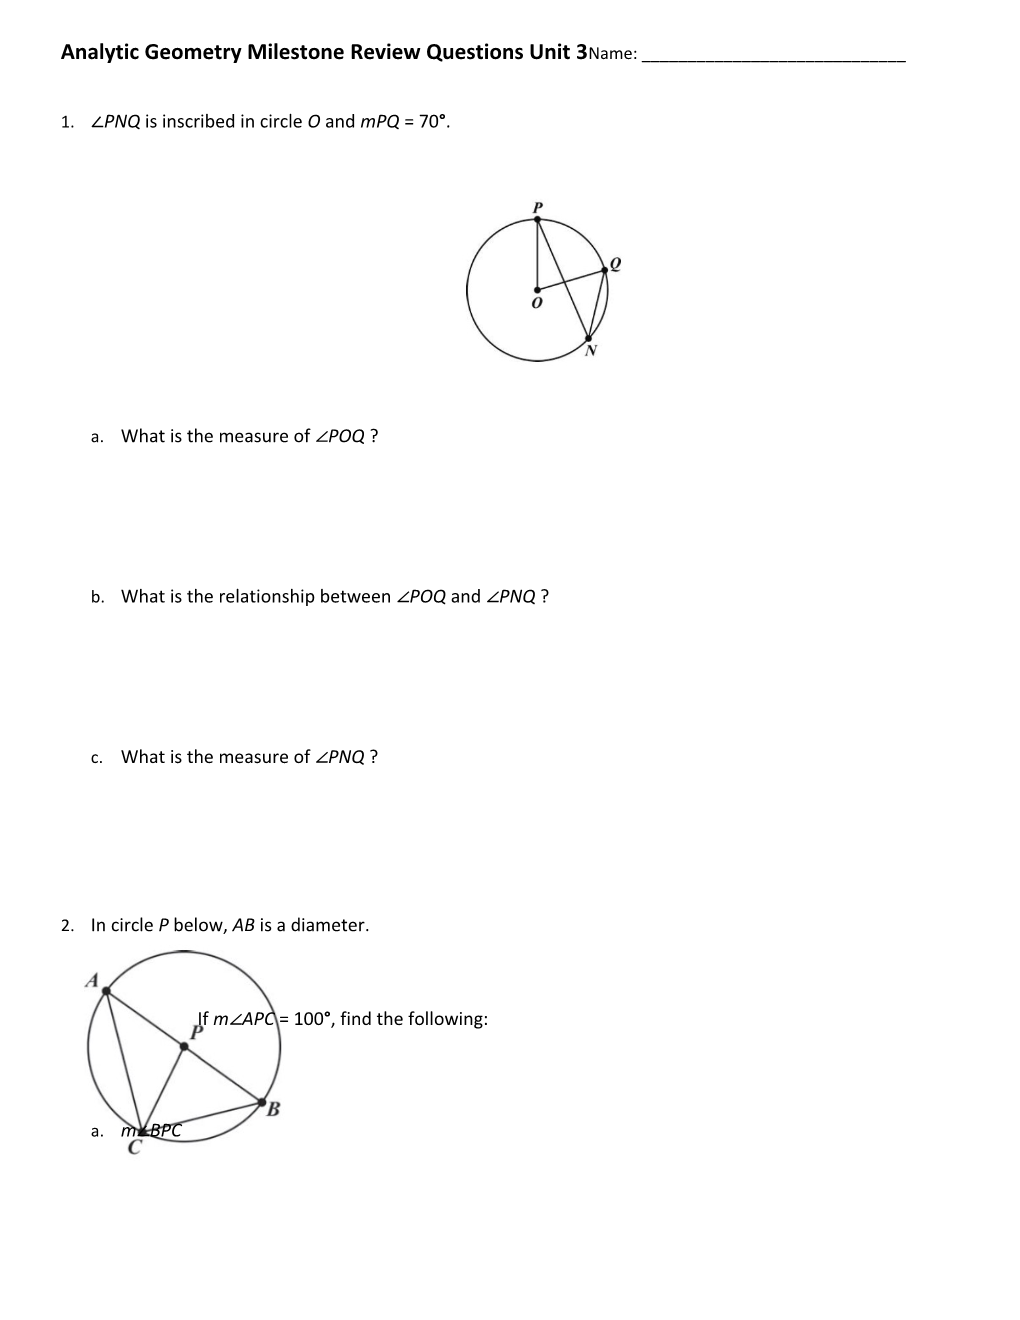 Analytic Geometry Milestone Review Questions Unit 3 Name: ______